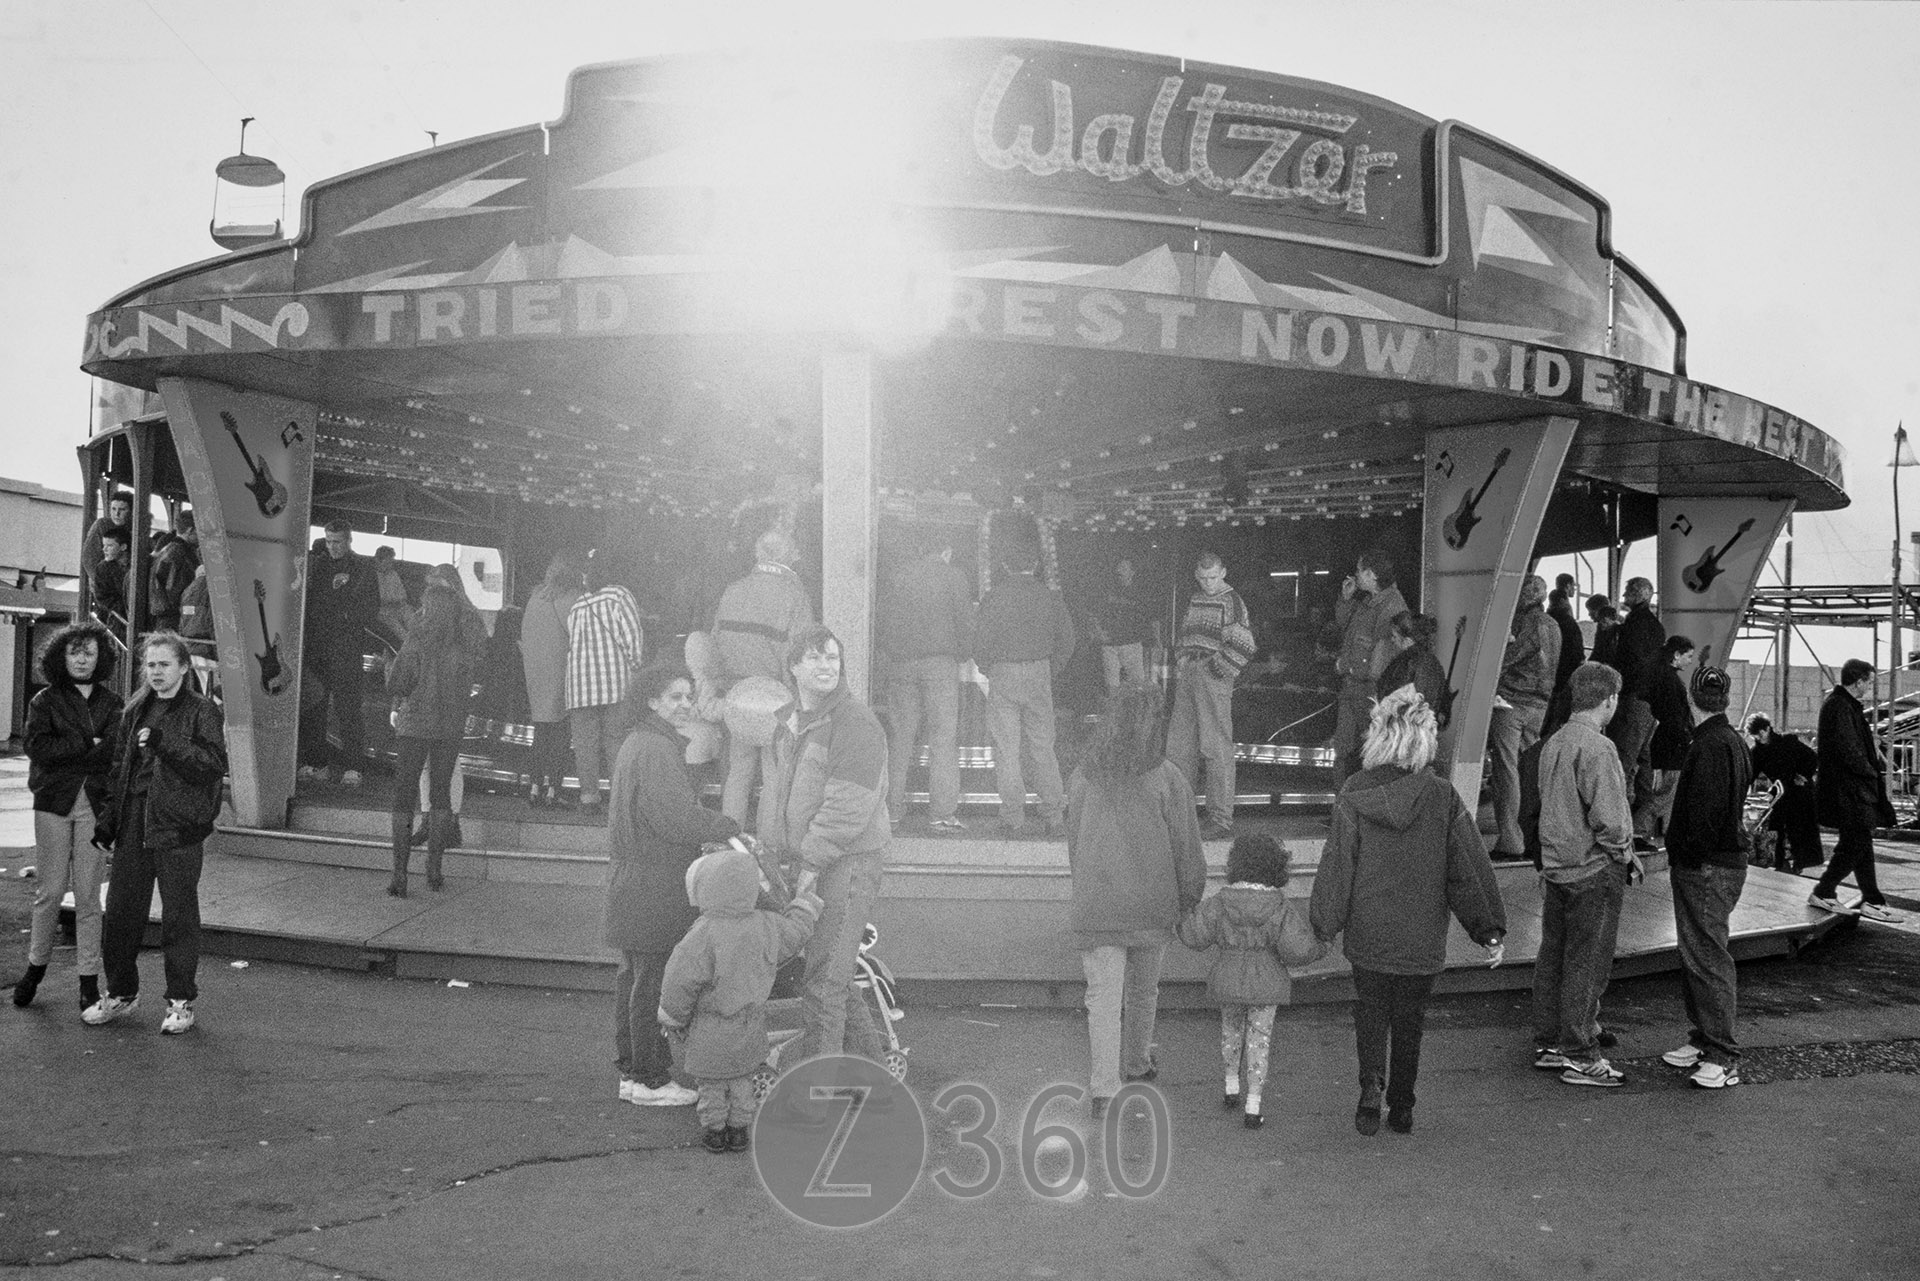 The Waltzer, home of the bad boys